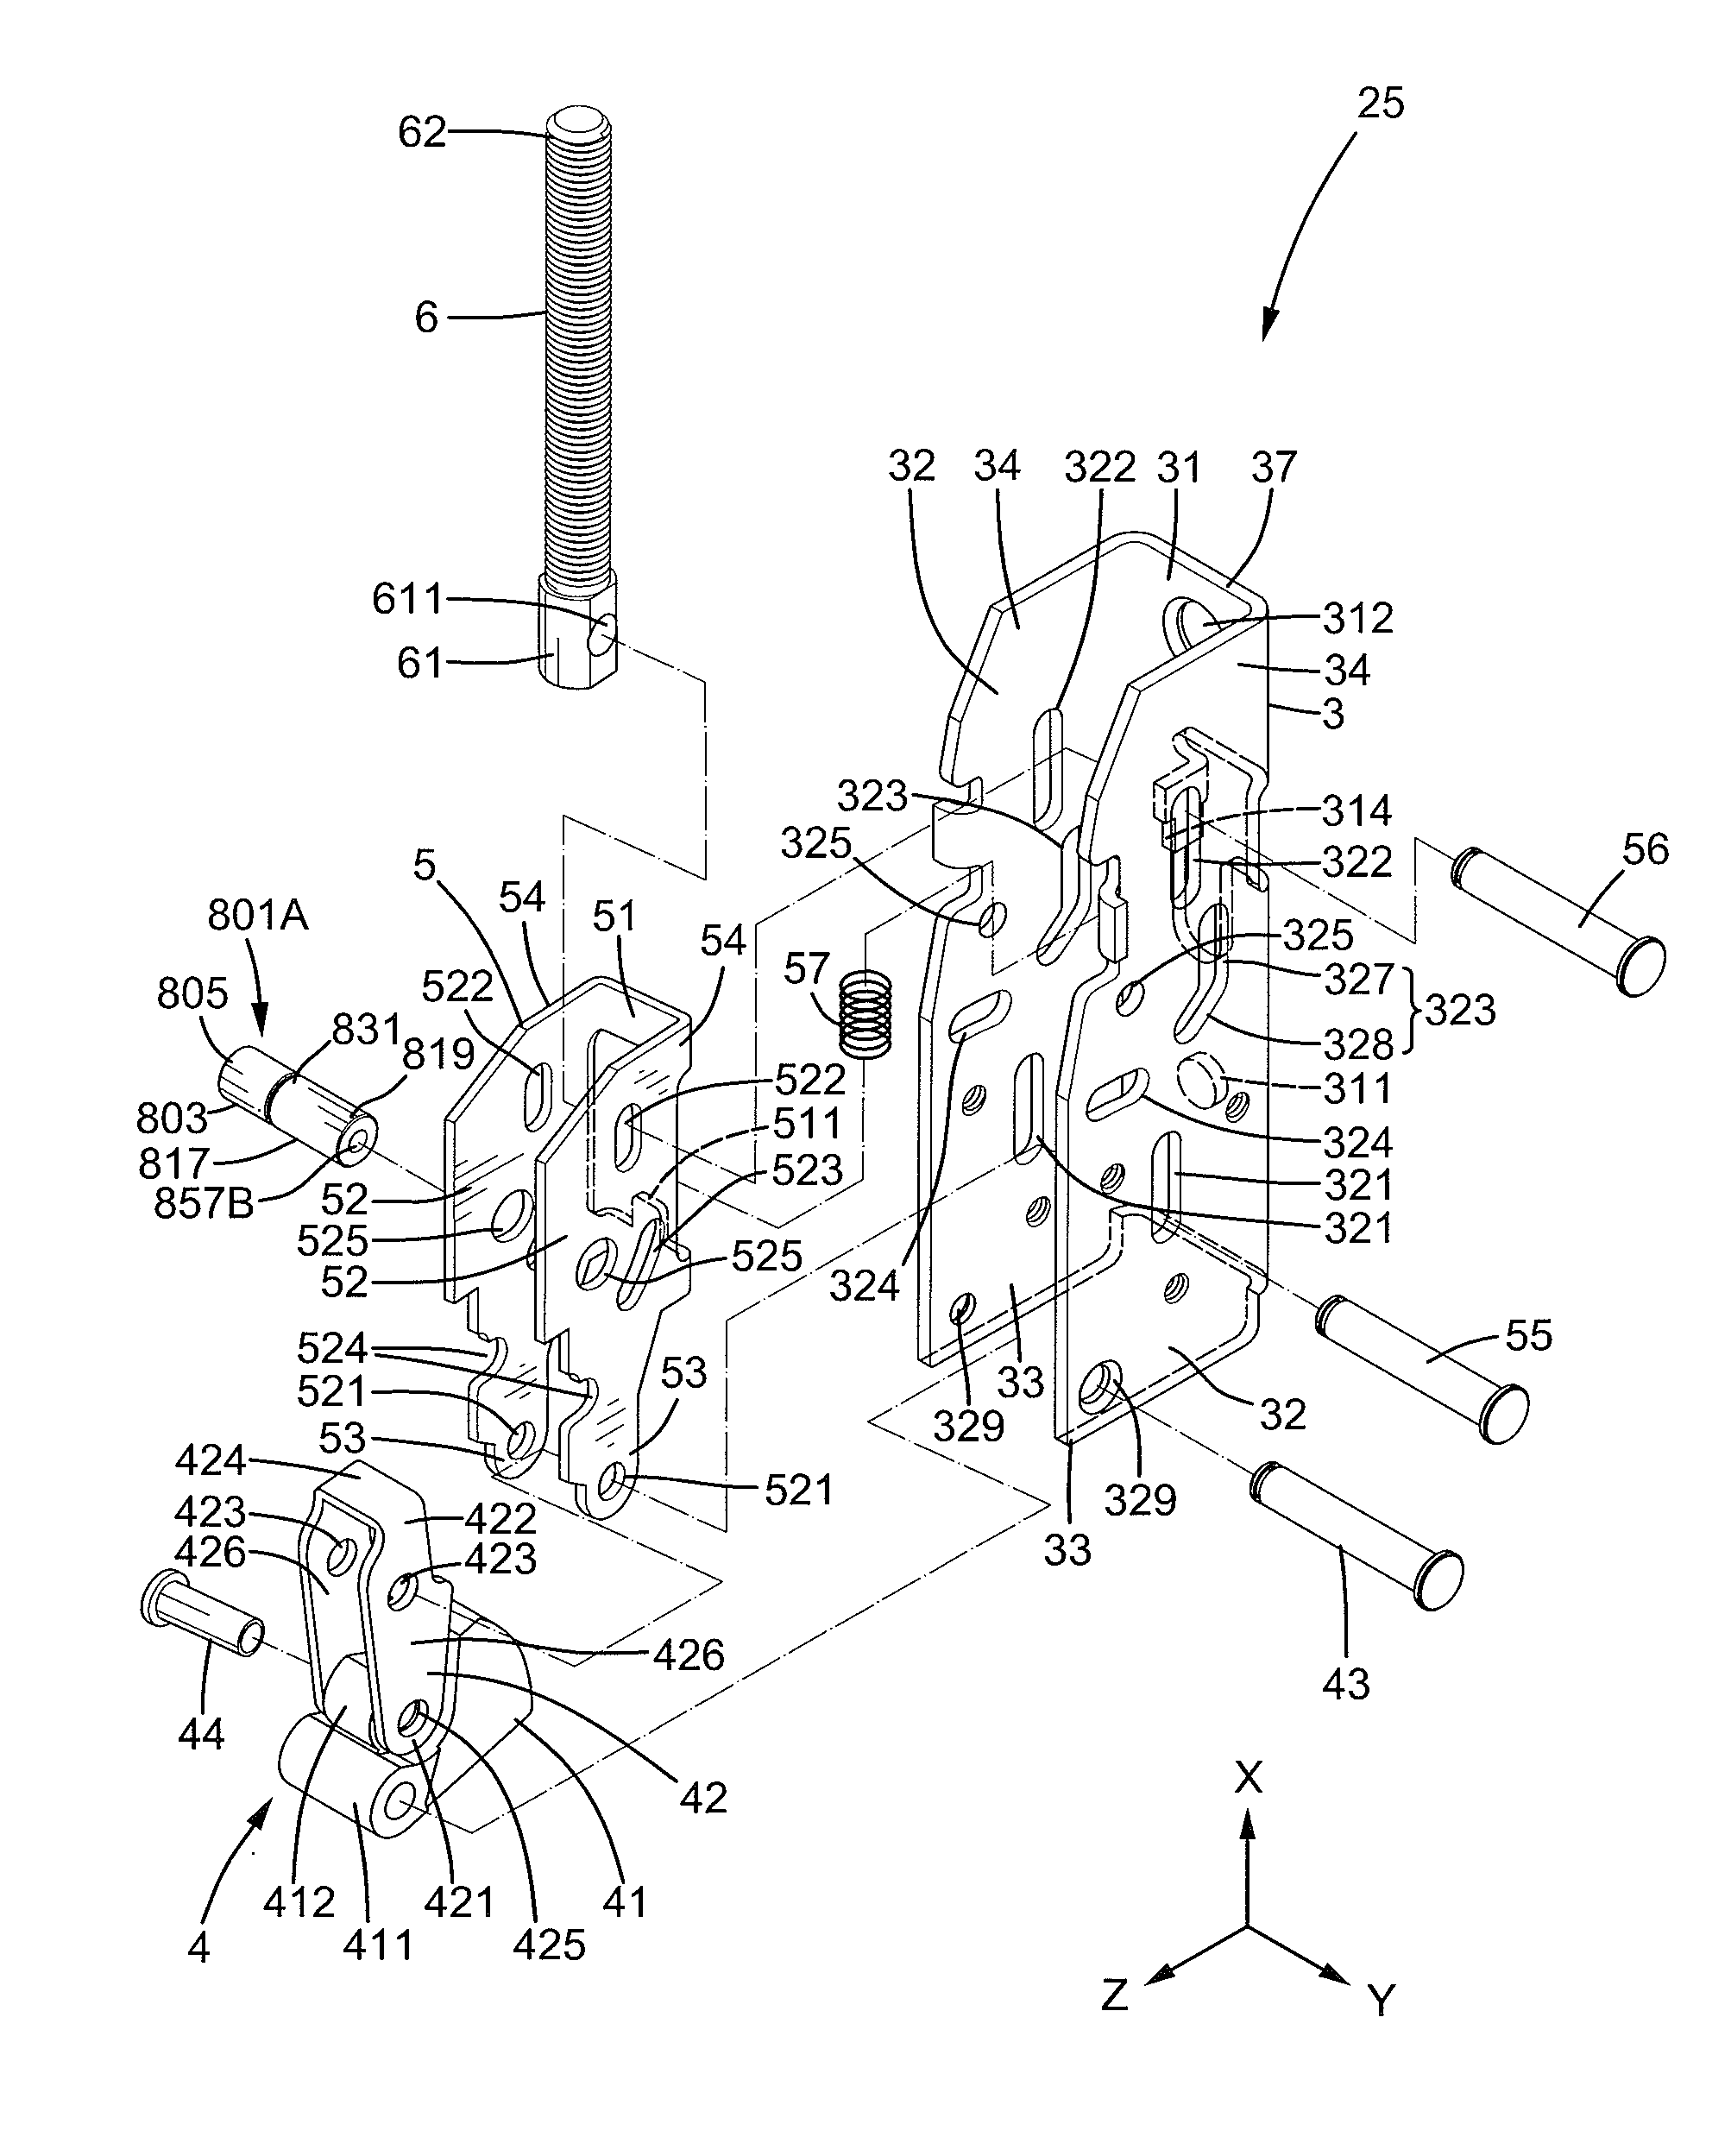 Latch Assembly with a Safety Device for a Fireproof Door Lock